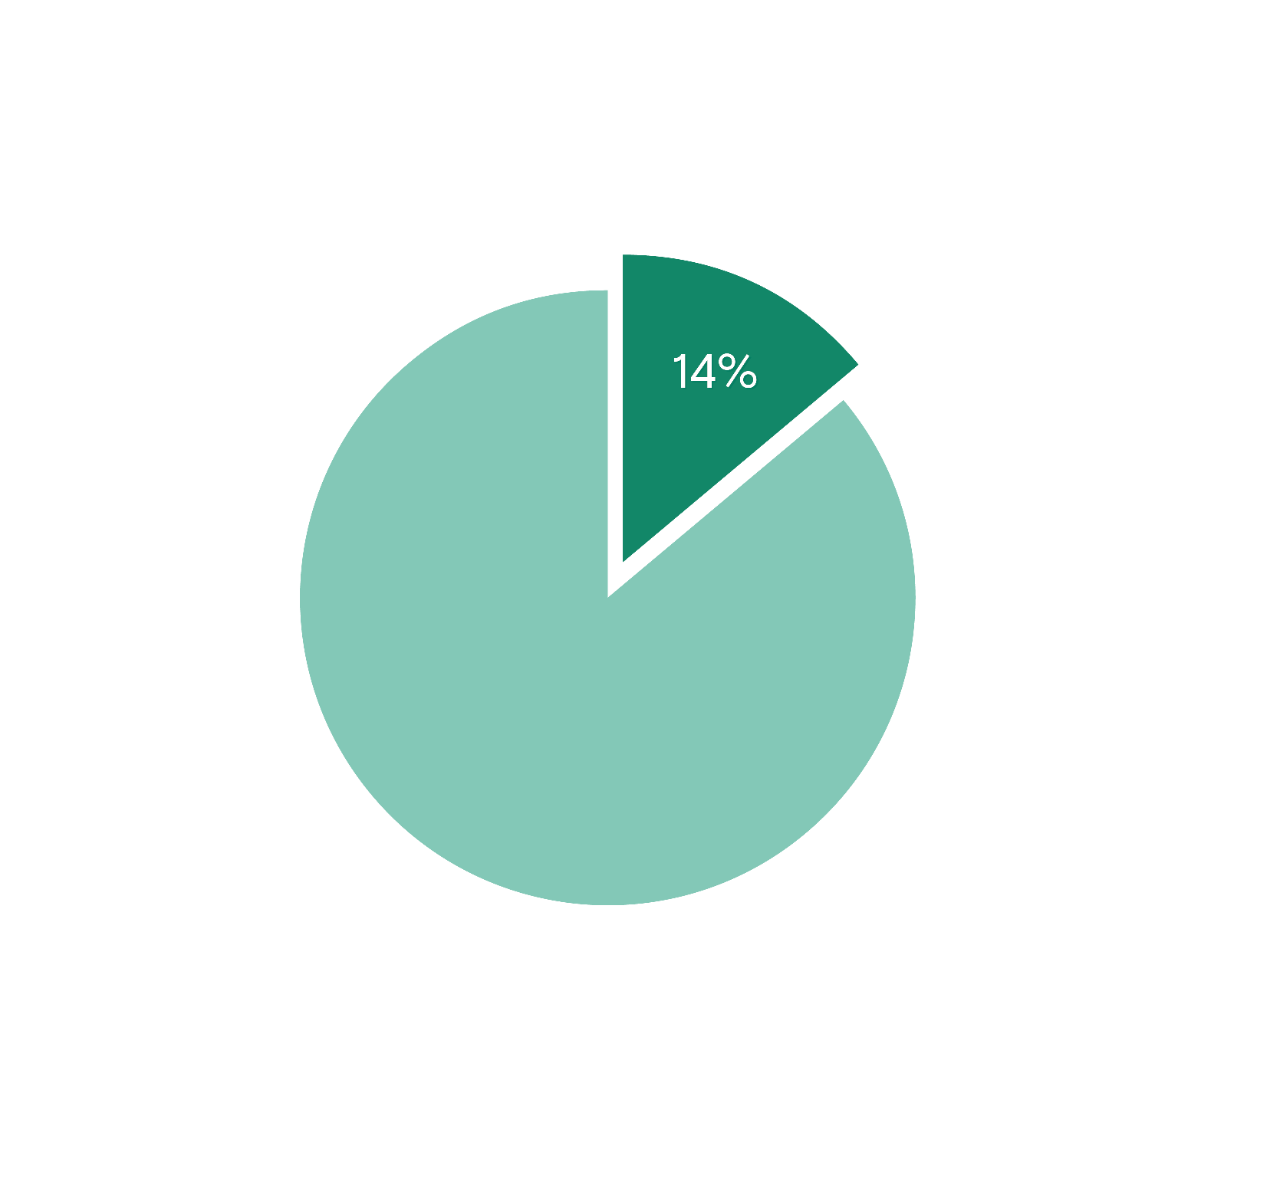 Image shows a pie chart. The larger segment is in light green. The smaller segment is towards the top of the pie chart and in dark green, within this segment is white text which reads '14%'.